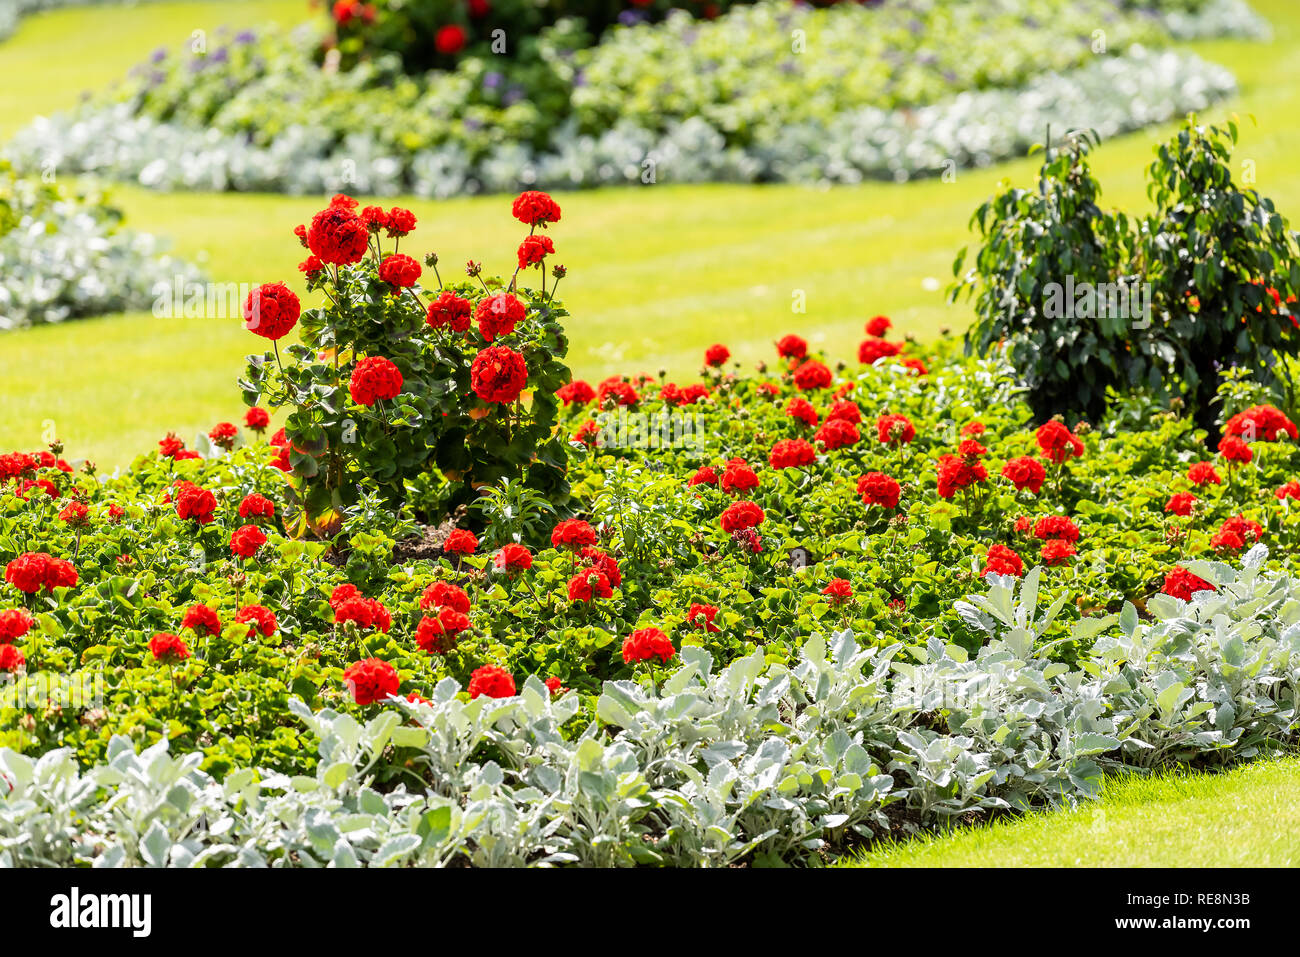 Sunny summer day with red rose flower landscaped garden in London closeup with vibrant yellow grass colors Stock Photo